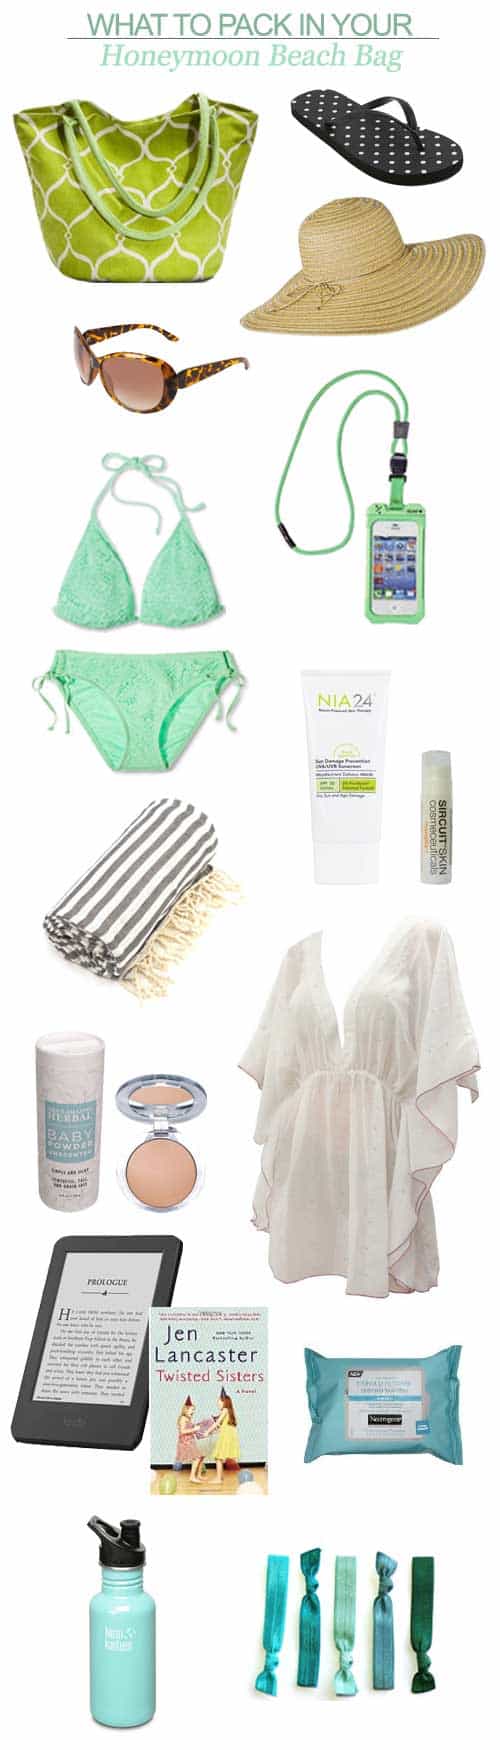 Here's my suggestions for what to pack in your honeymoon beach bag: